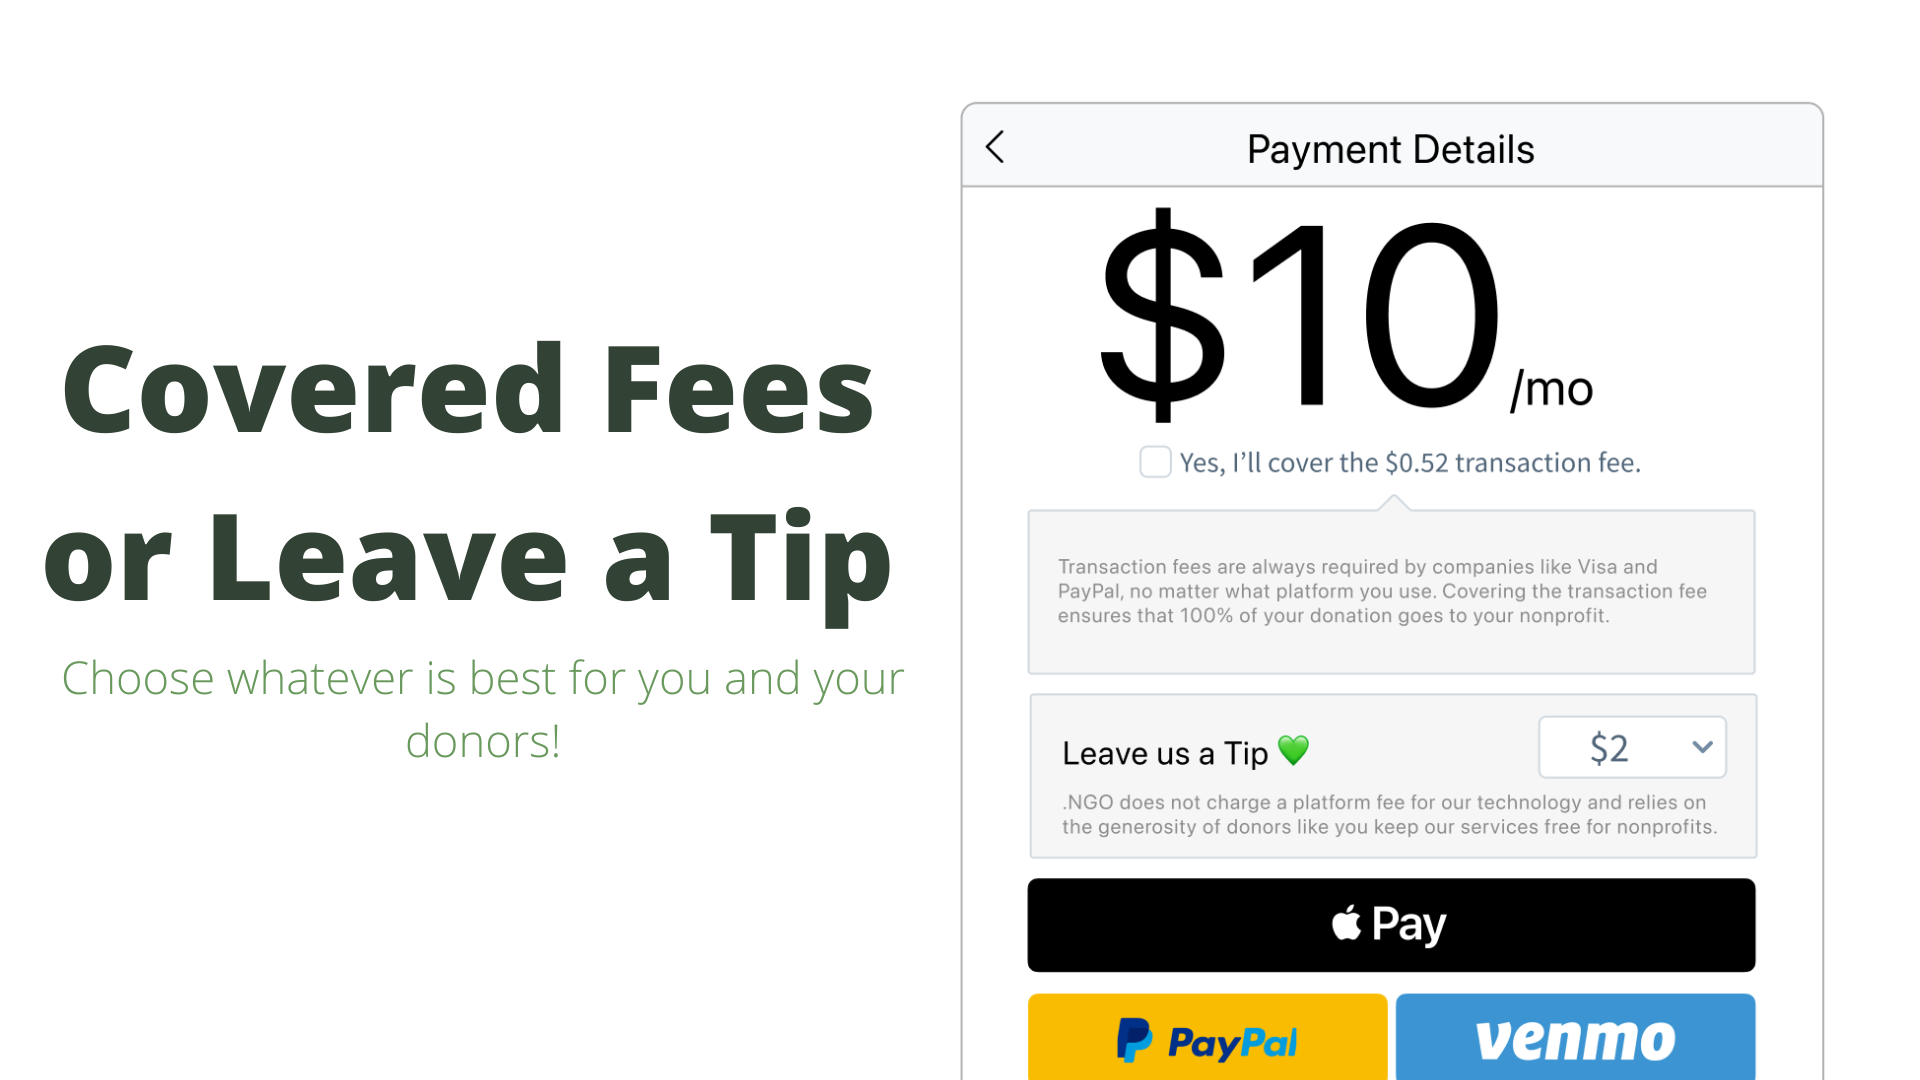 Covered Fees & Leave a Tip